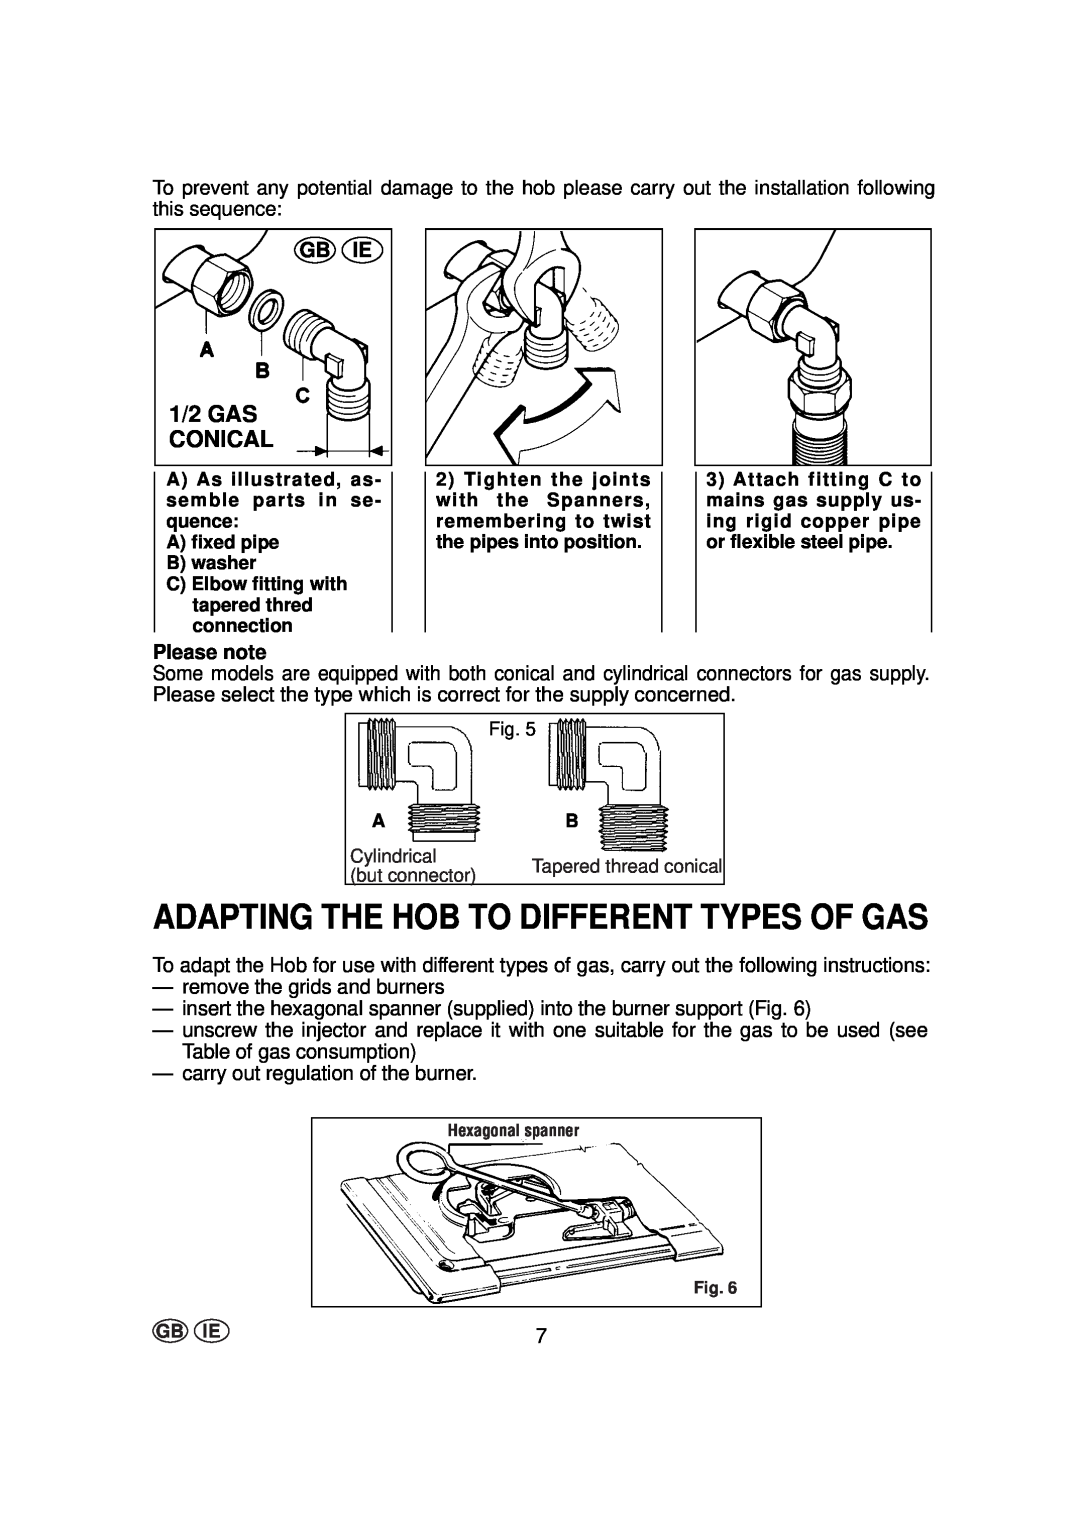 Hoover HGD 750 SGH, HGH 640 W, HGH 640 SX Adapting The Hob To Different Types Of Gas, Gb Ie, Please note, 1/2 GAS CONICAL 